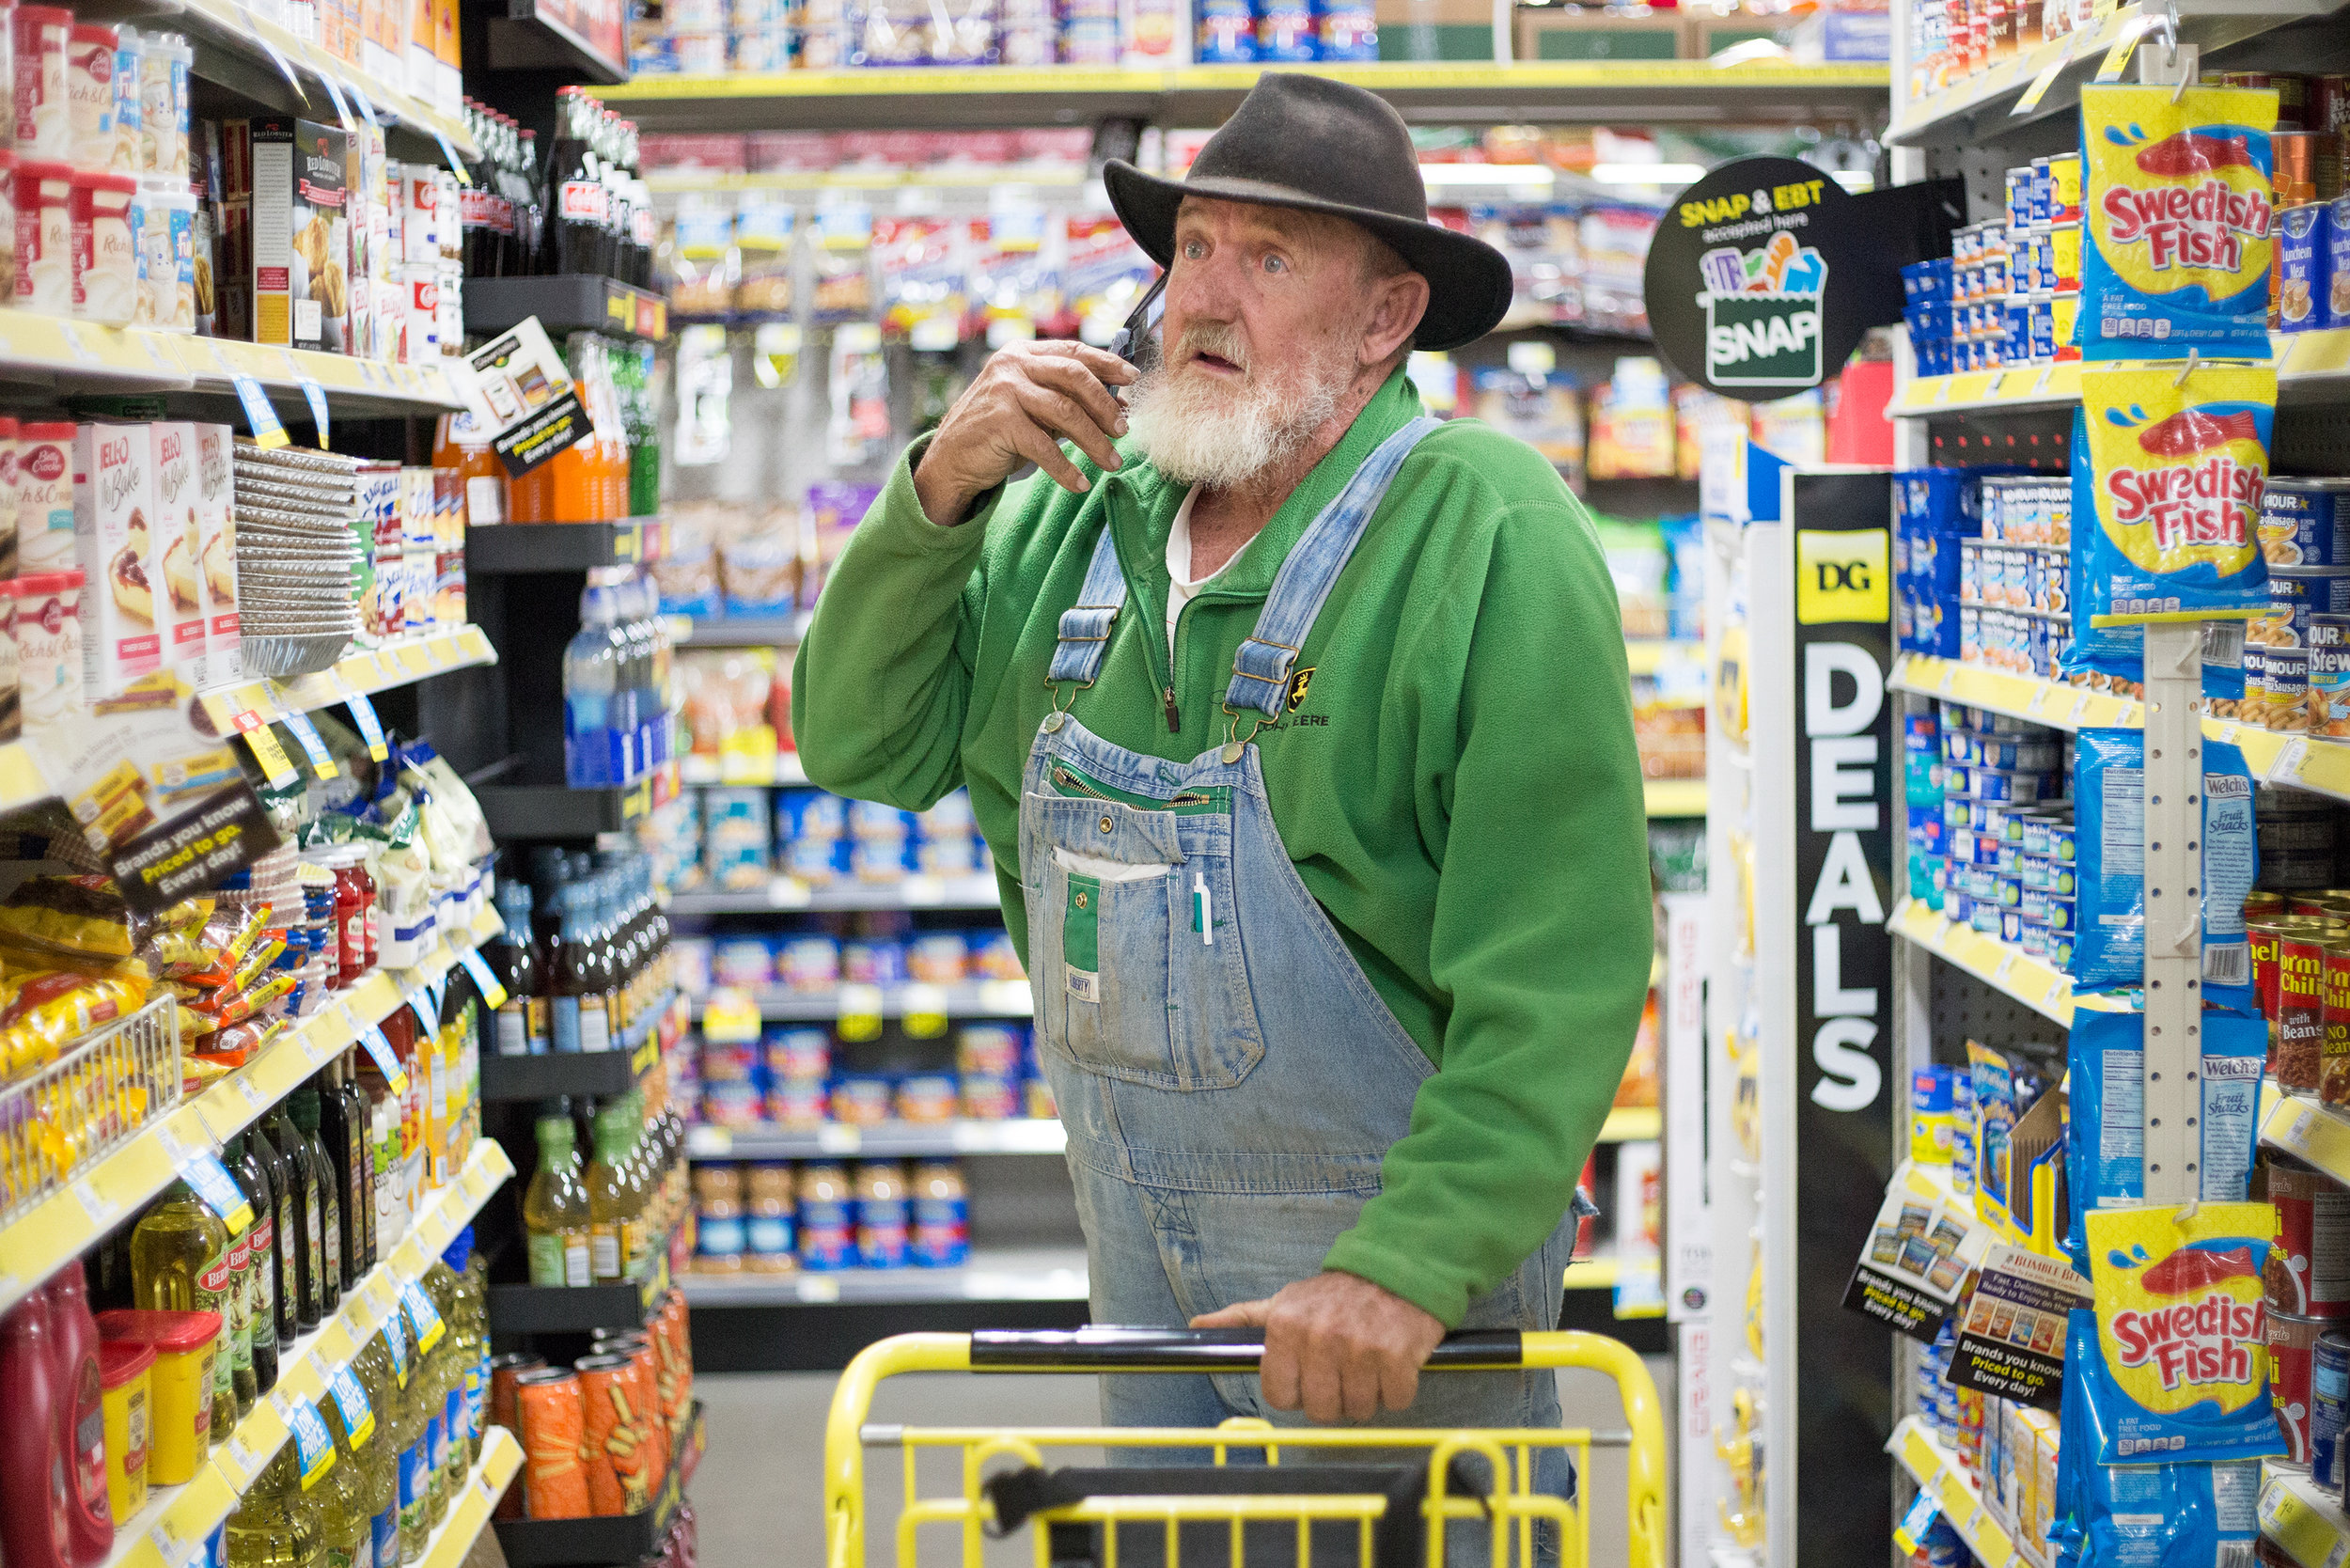  George Beaty of Evensville, Tenn. scans the aisles for cream of chicken soup for his neighbor at Dollar General in Evensville, Tenn. Thursday, Nov. 16 2017. Beaty, a retired welder and plumber, said he usually stops by the store several times a week